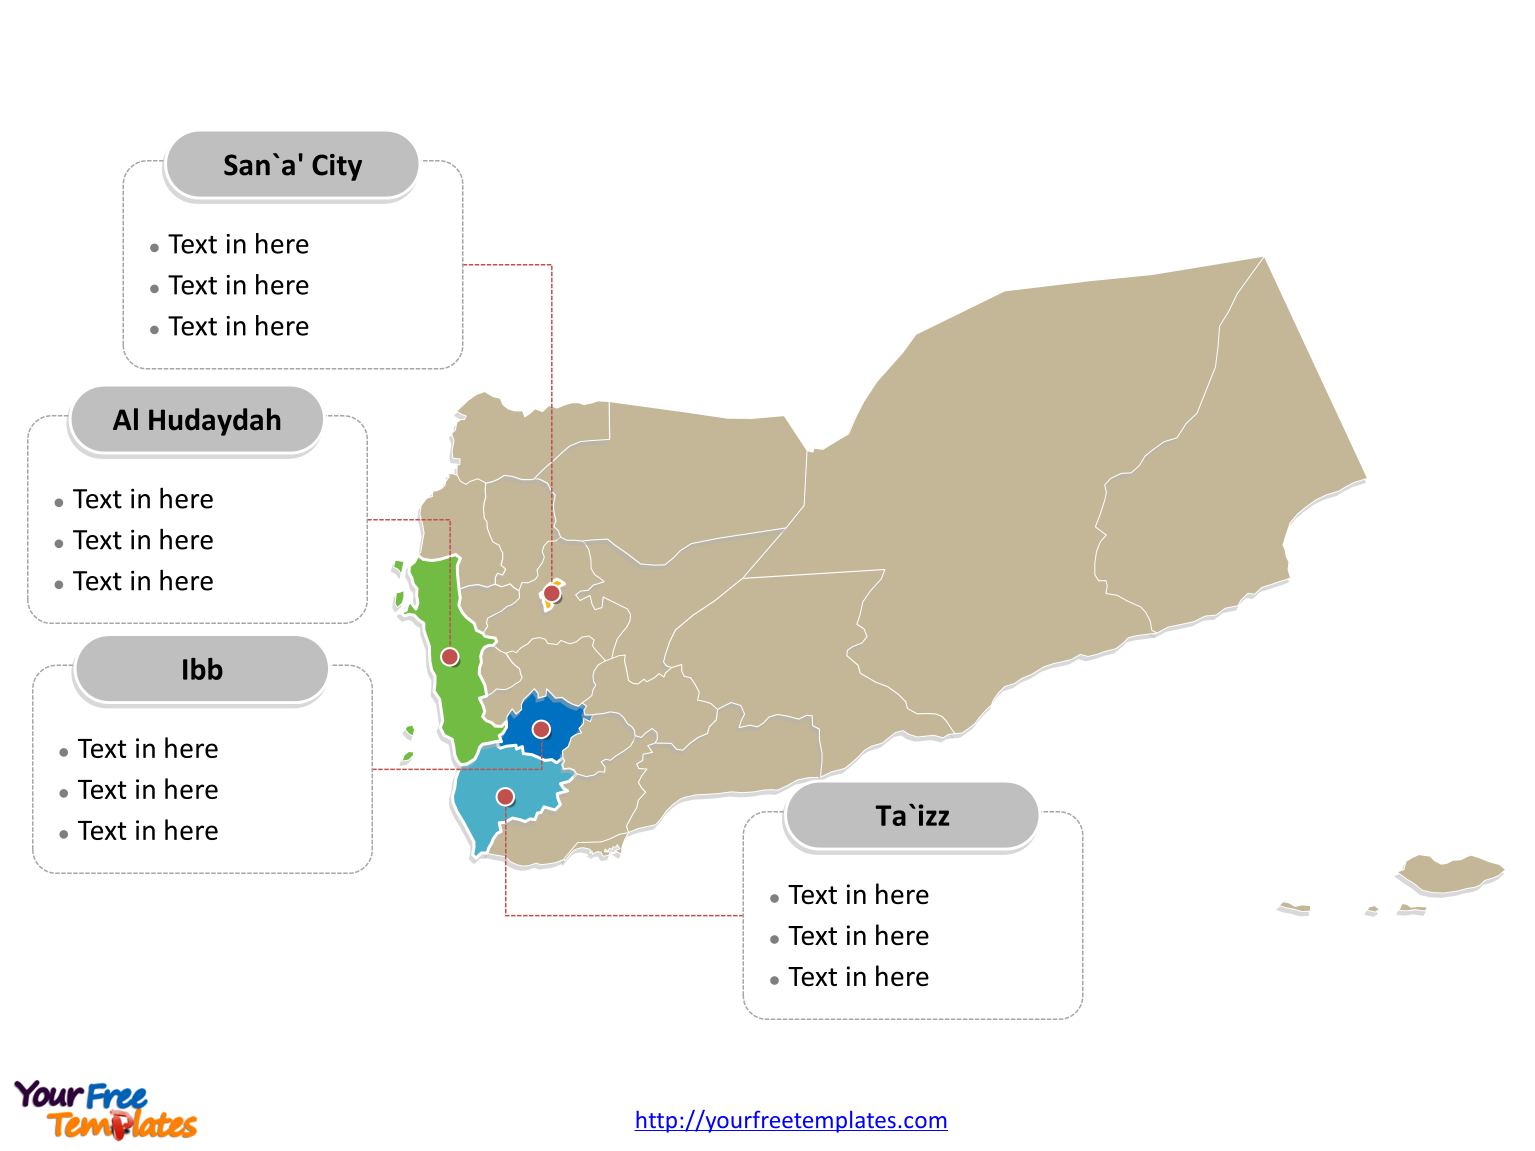 Yemen Political map labeled with major governorates